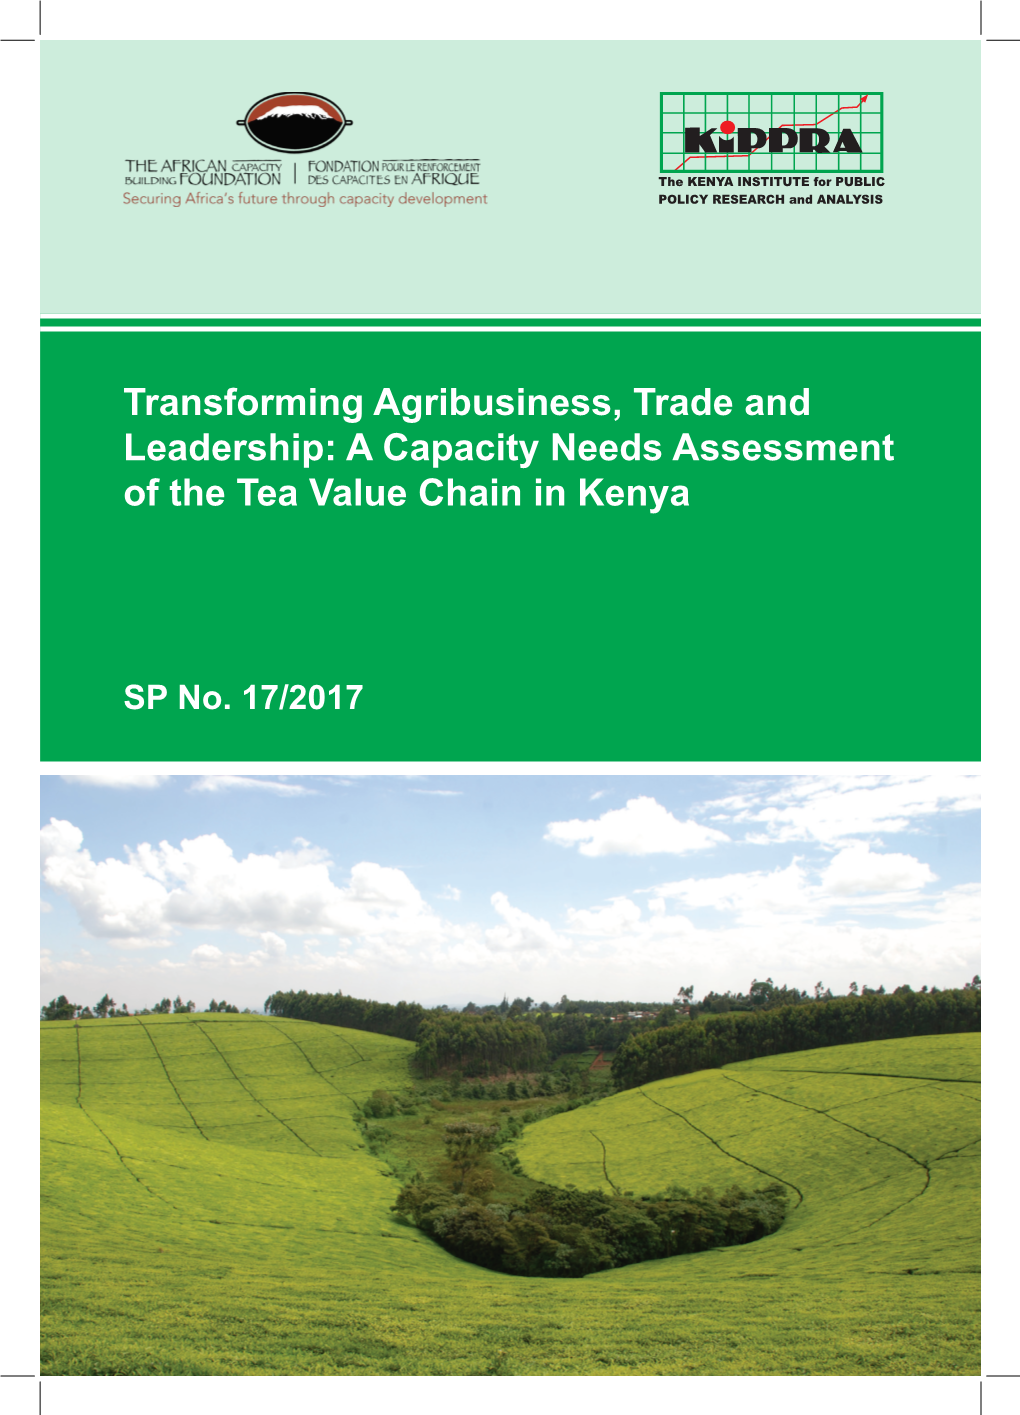 A Capacity Needs Assessment of the Tea Value Chain in Kenya